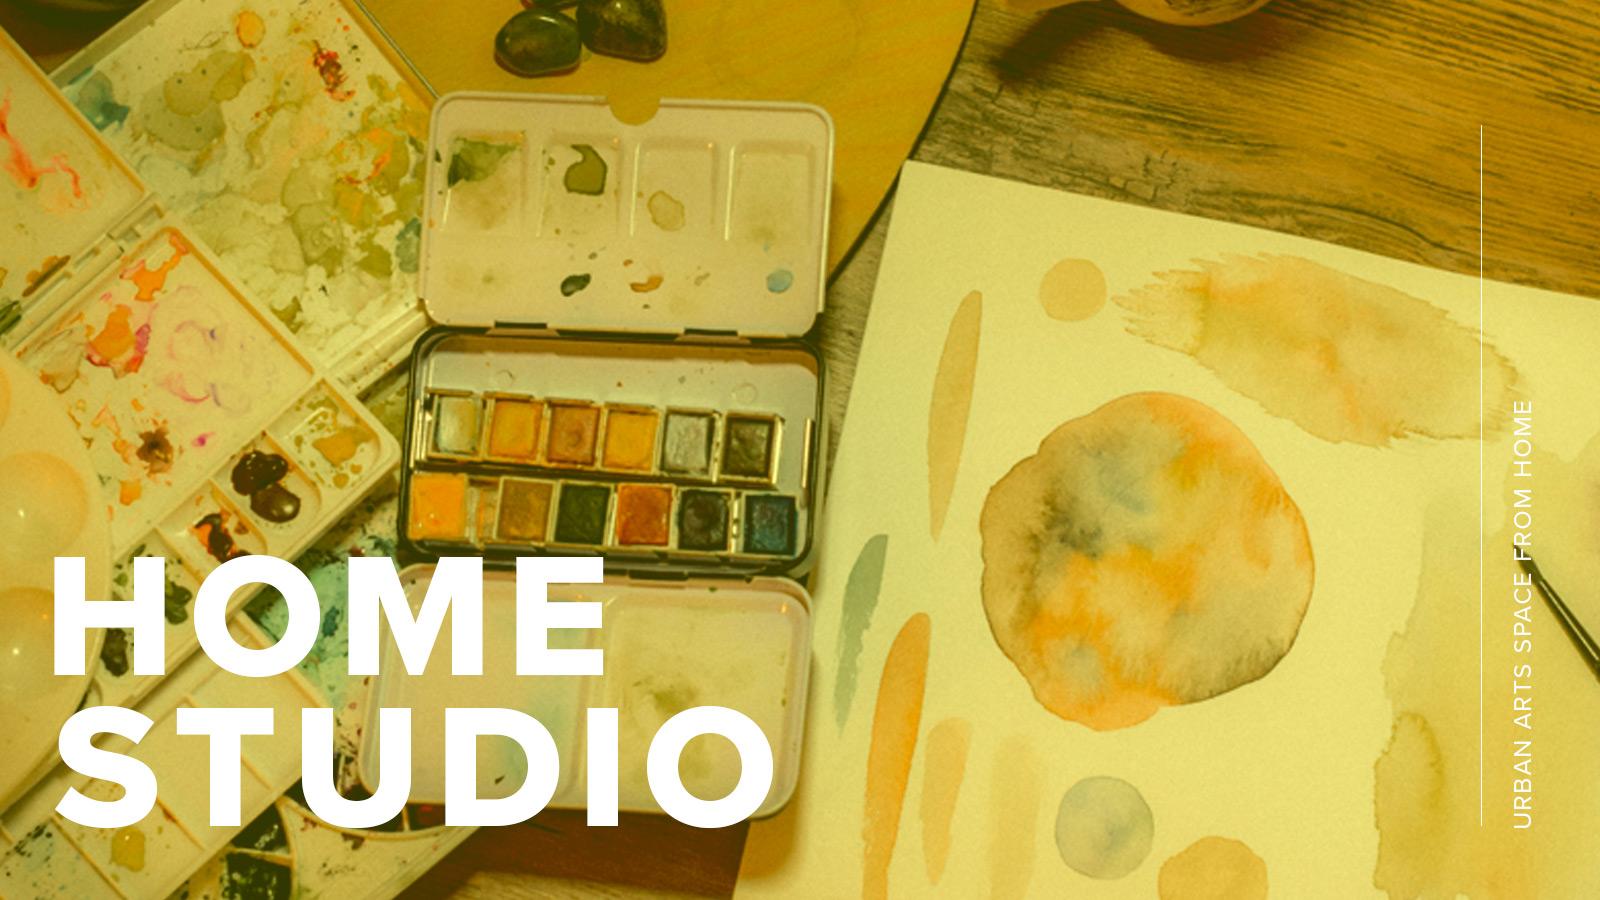 A set of watercolor palettes and a paper with watercolor drawings, covered by a yellow overlay and text that says "Home Studio"